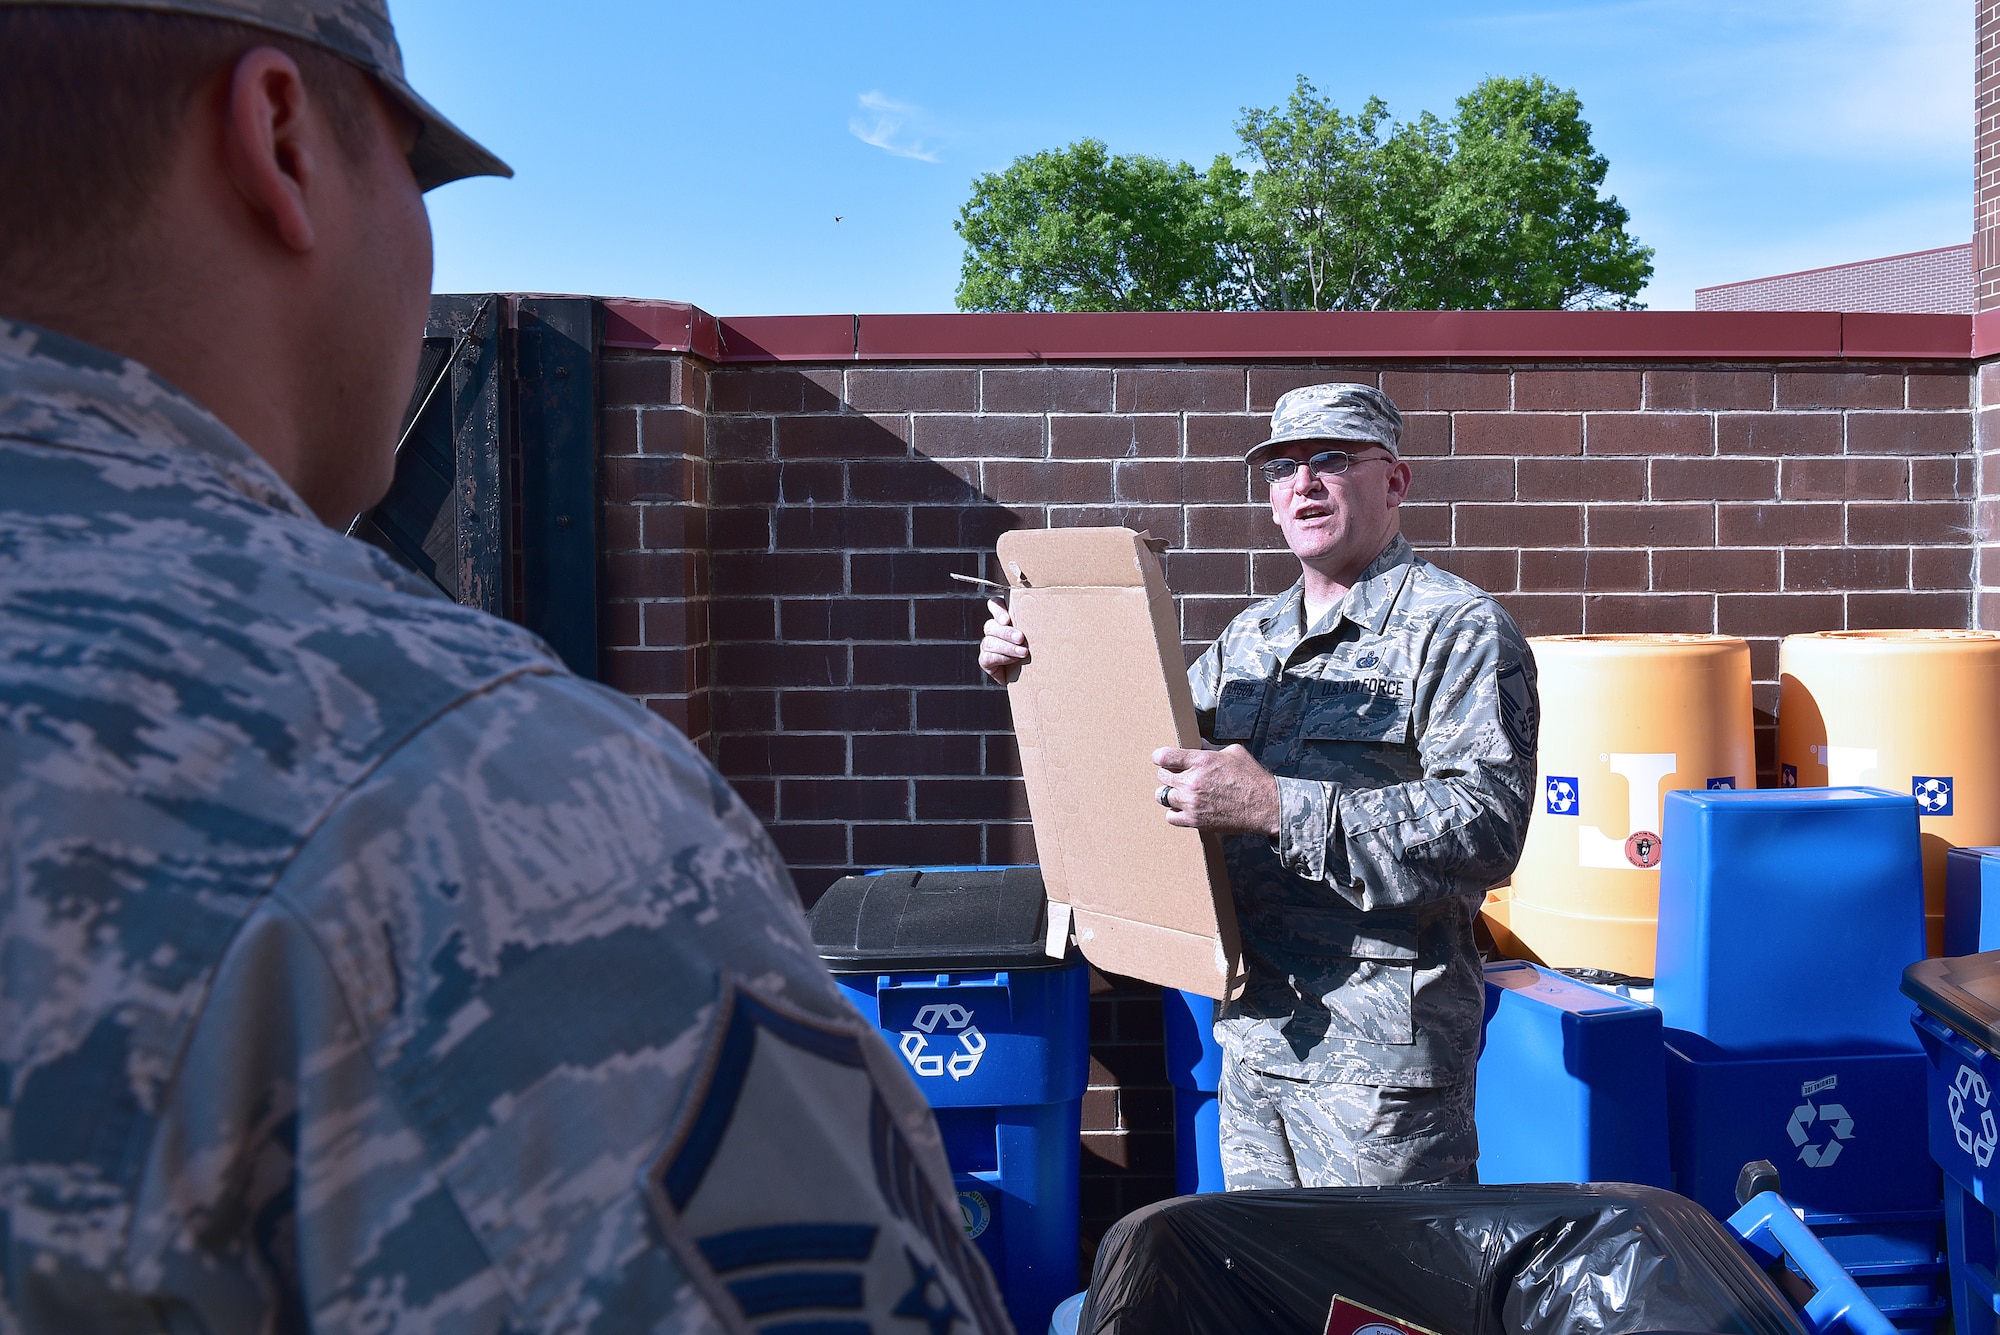 MCGHEE TYSON AIR NATIONAL GUARD BASE, Tenn. - Logistics Manager, Master Sgt. Don Pierson, right, and Master Sgt. Jose A. Santiago, Services manager, break down boxes disguarded at the recycle area here May 10, 2016, at the I.G. Brown Training and Education Center. Pierson is preparing Santiago for many unrealized and unseen support duties on campus before he departs for a reassignment in Texas. (U.S. Air National Guard photo by Master Sgt. Mike R. Smith/Released)